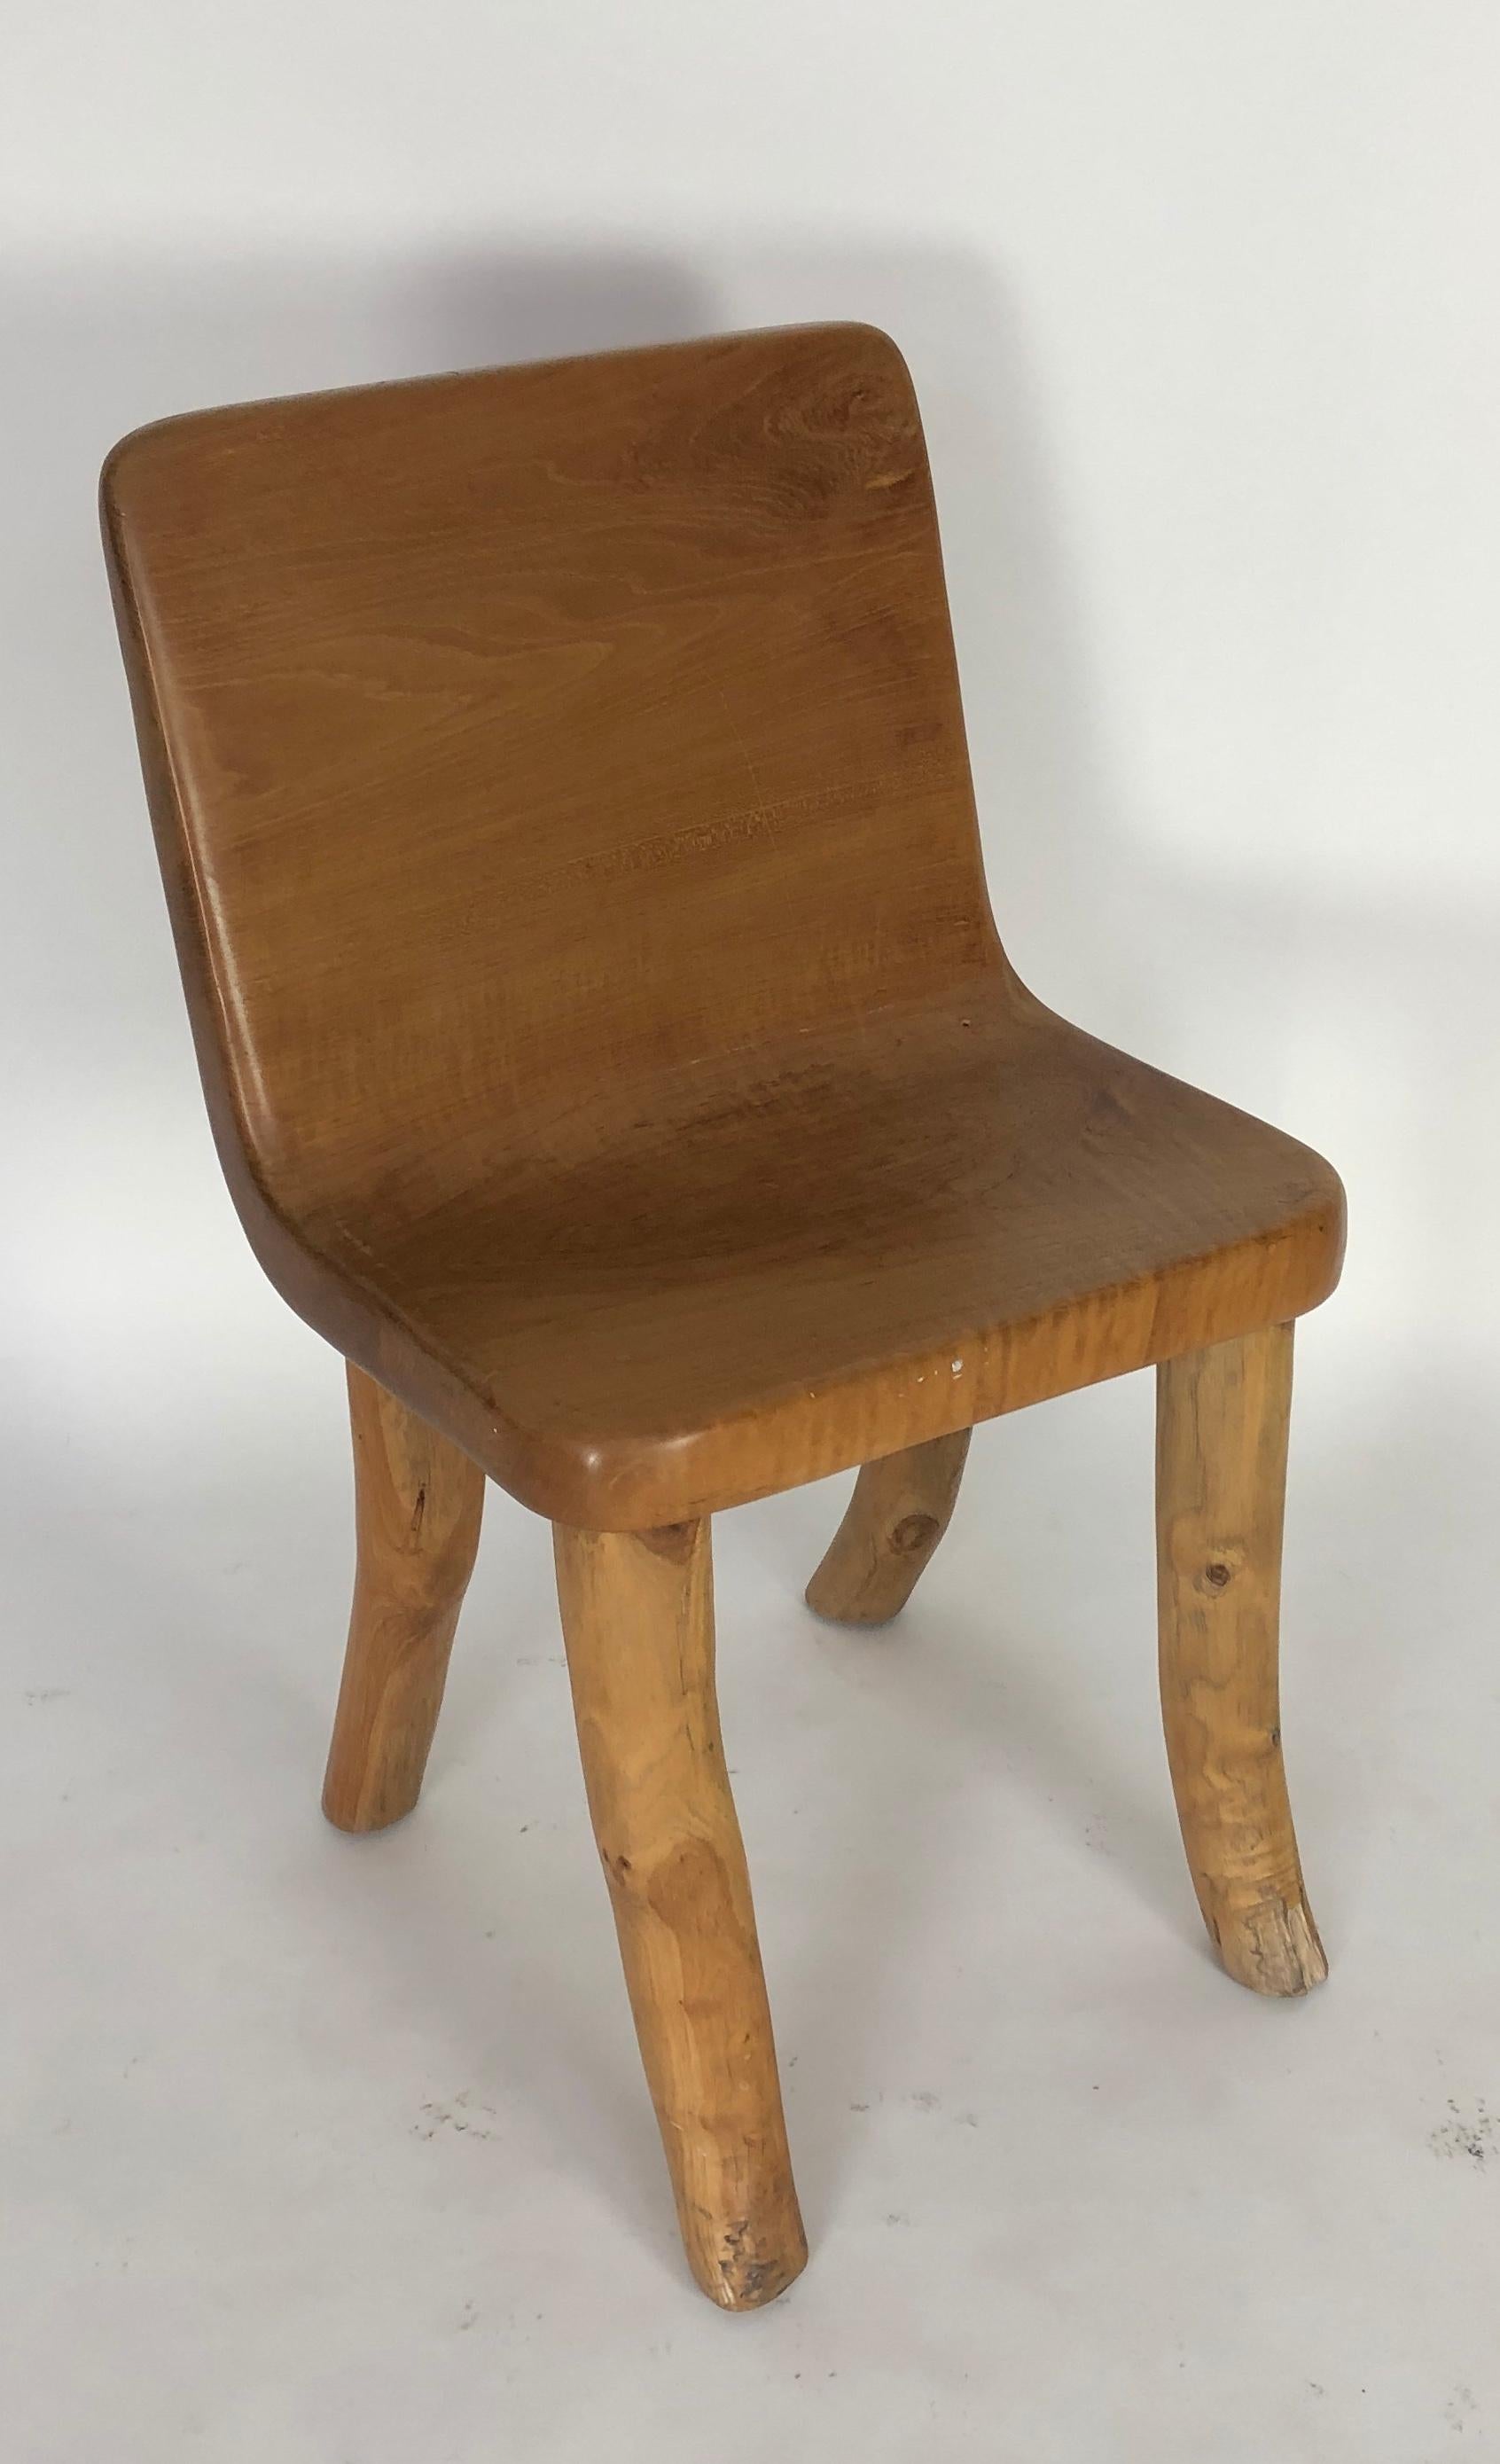 One of a kind chair, a true conversation piece. The body of the chair is carved from a solid piece of teak and the solid legs have been added. Unique in design. Solid, and ideal for either inside or out. The artist has created three of these chairs,